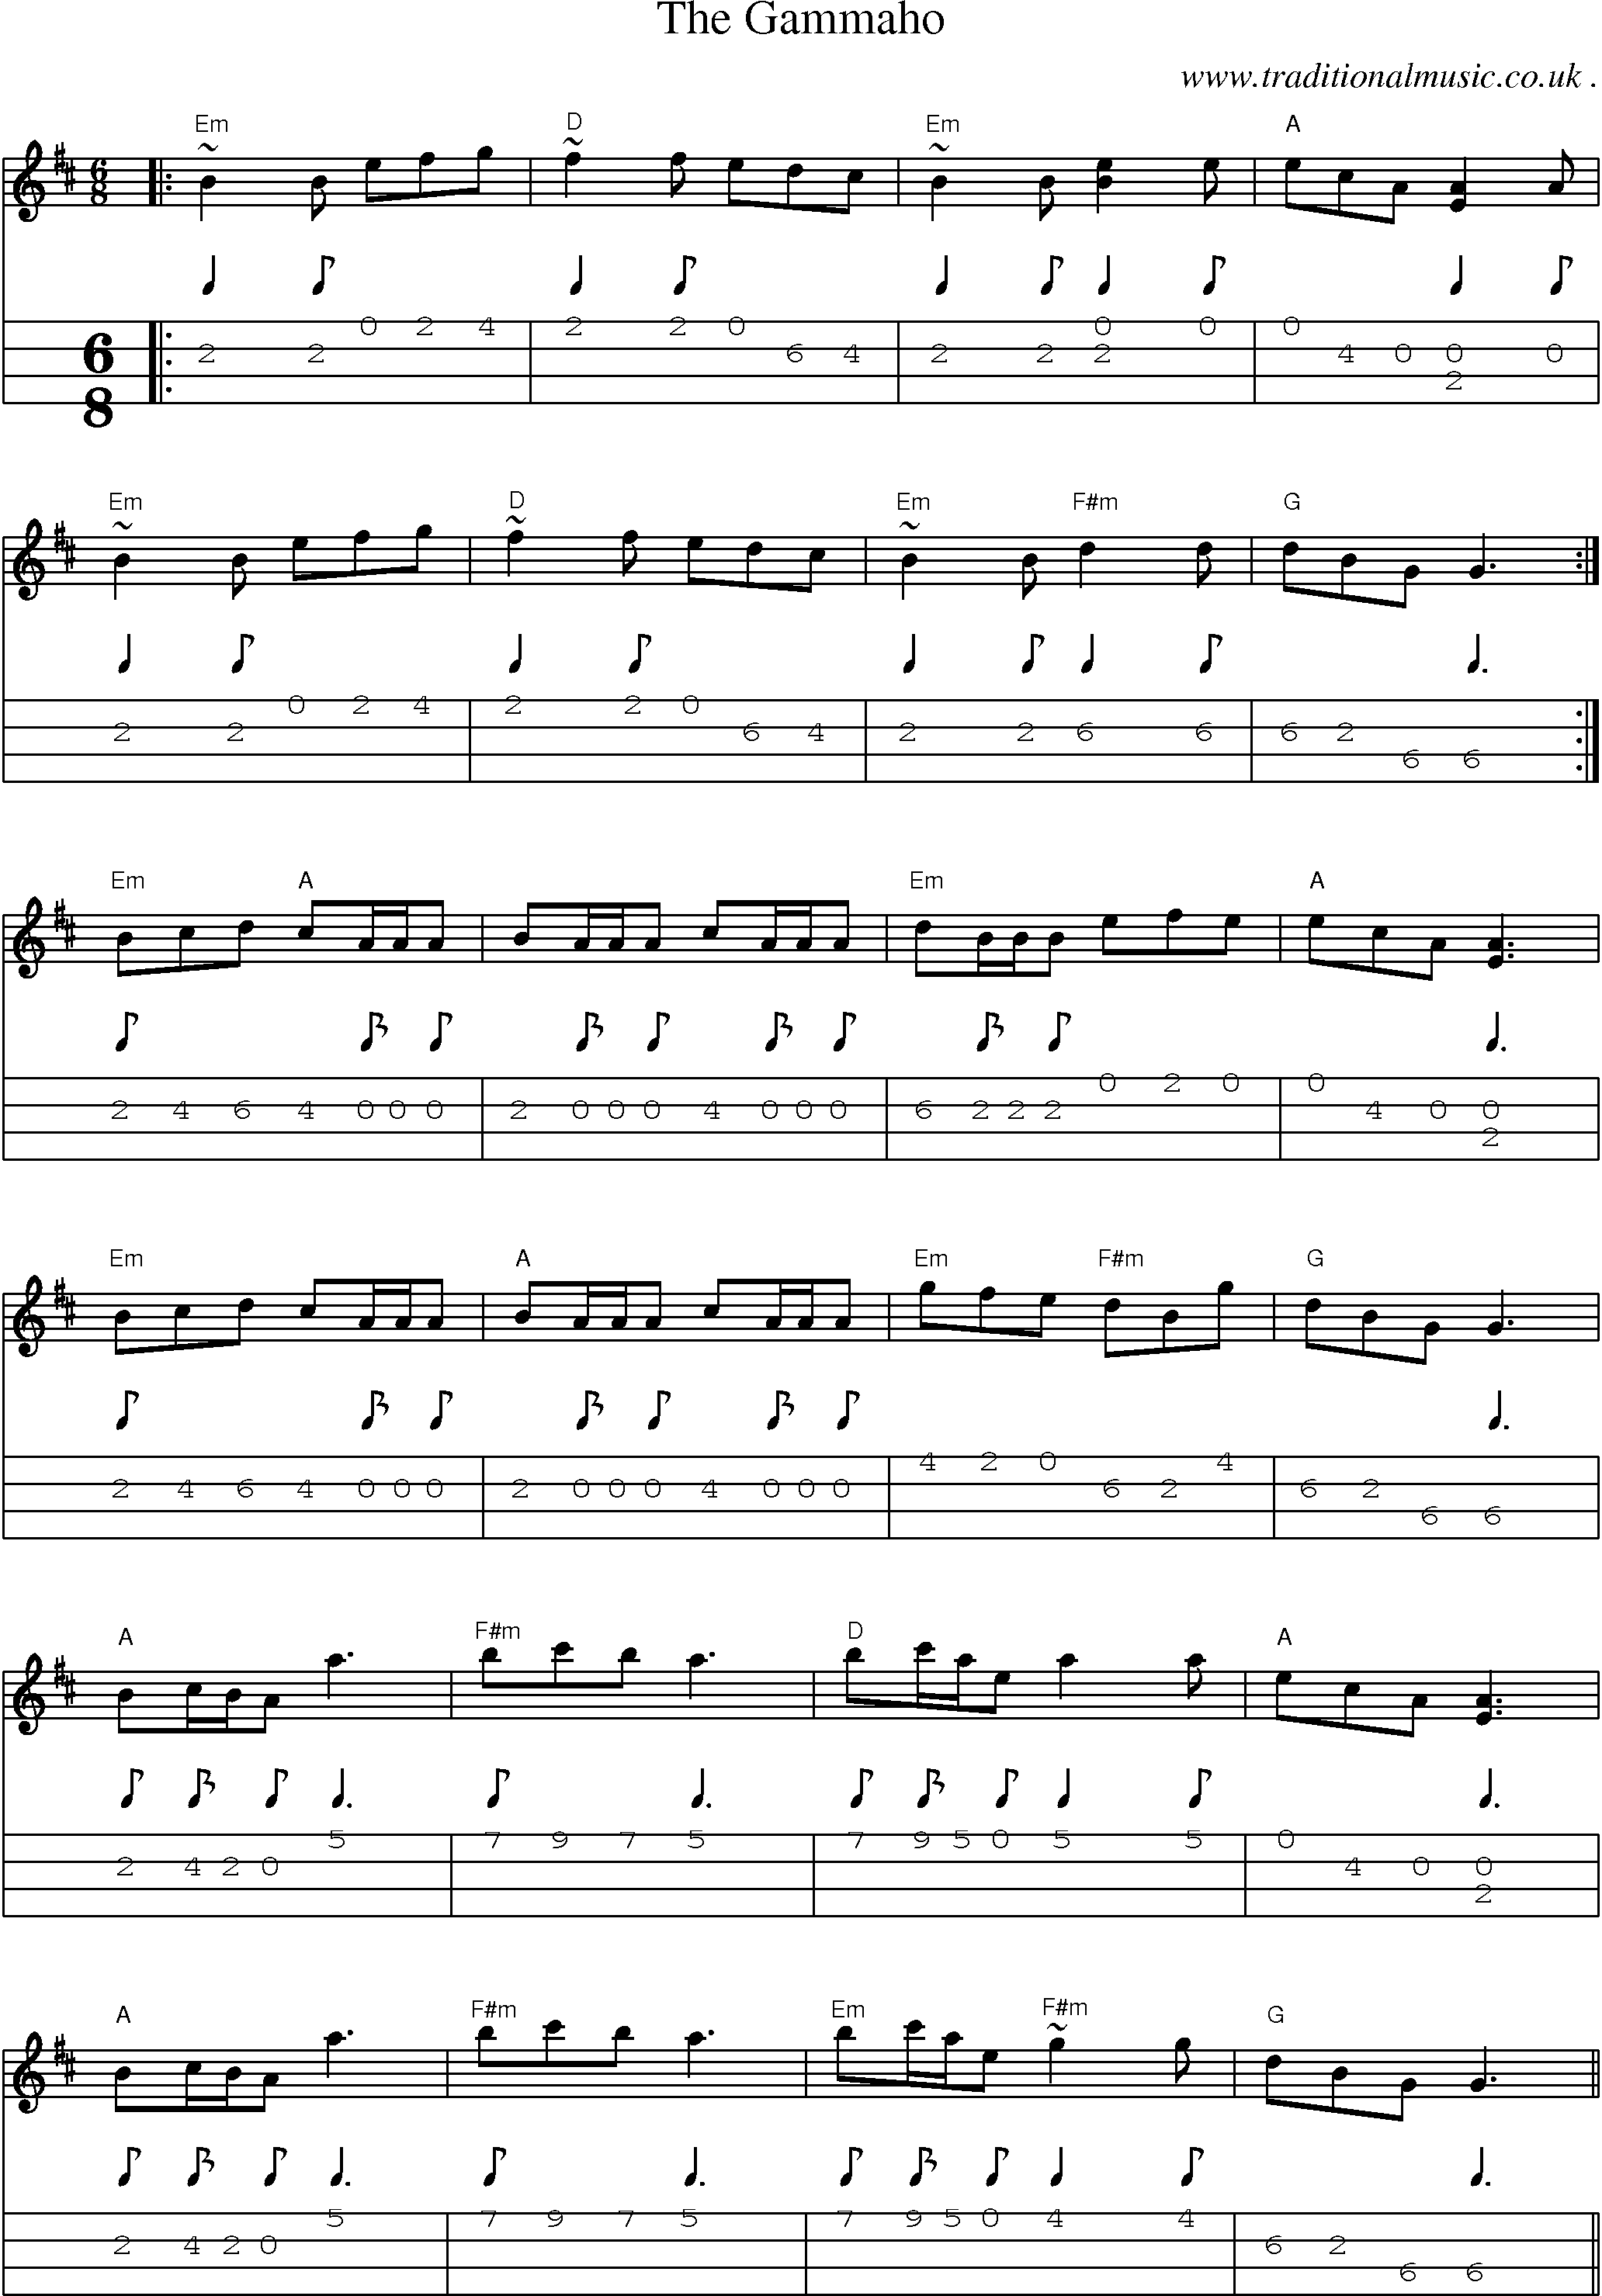 Music Score and Guitar Tabs for The Gammaho